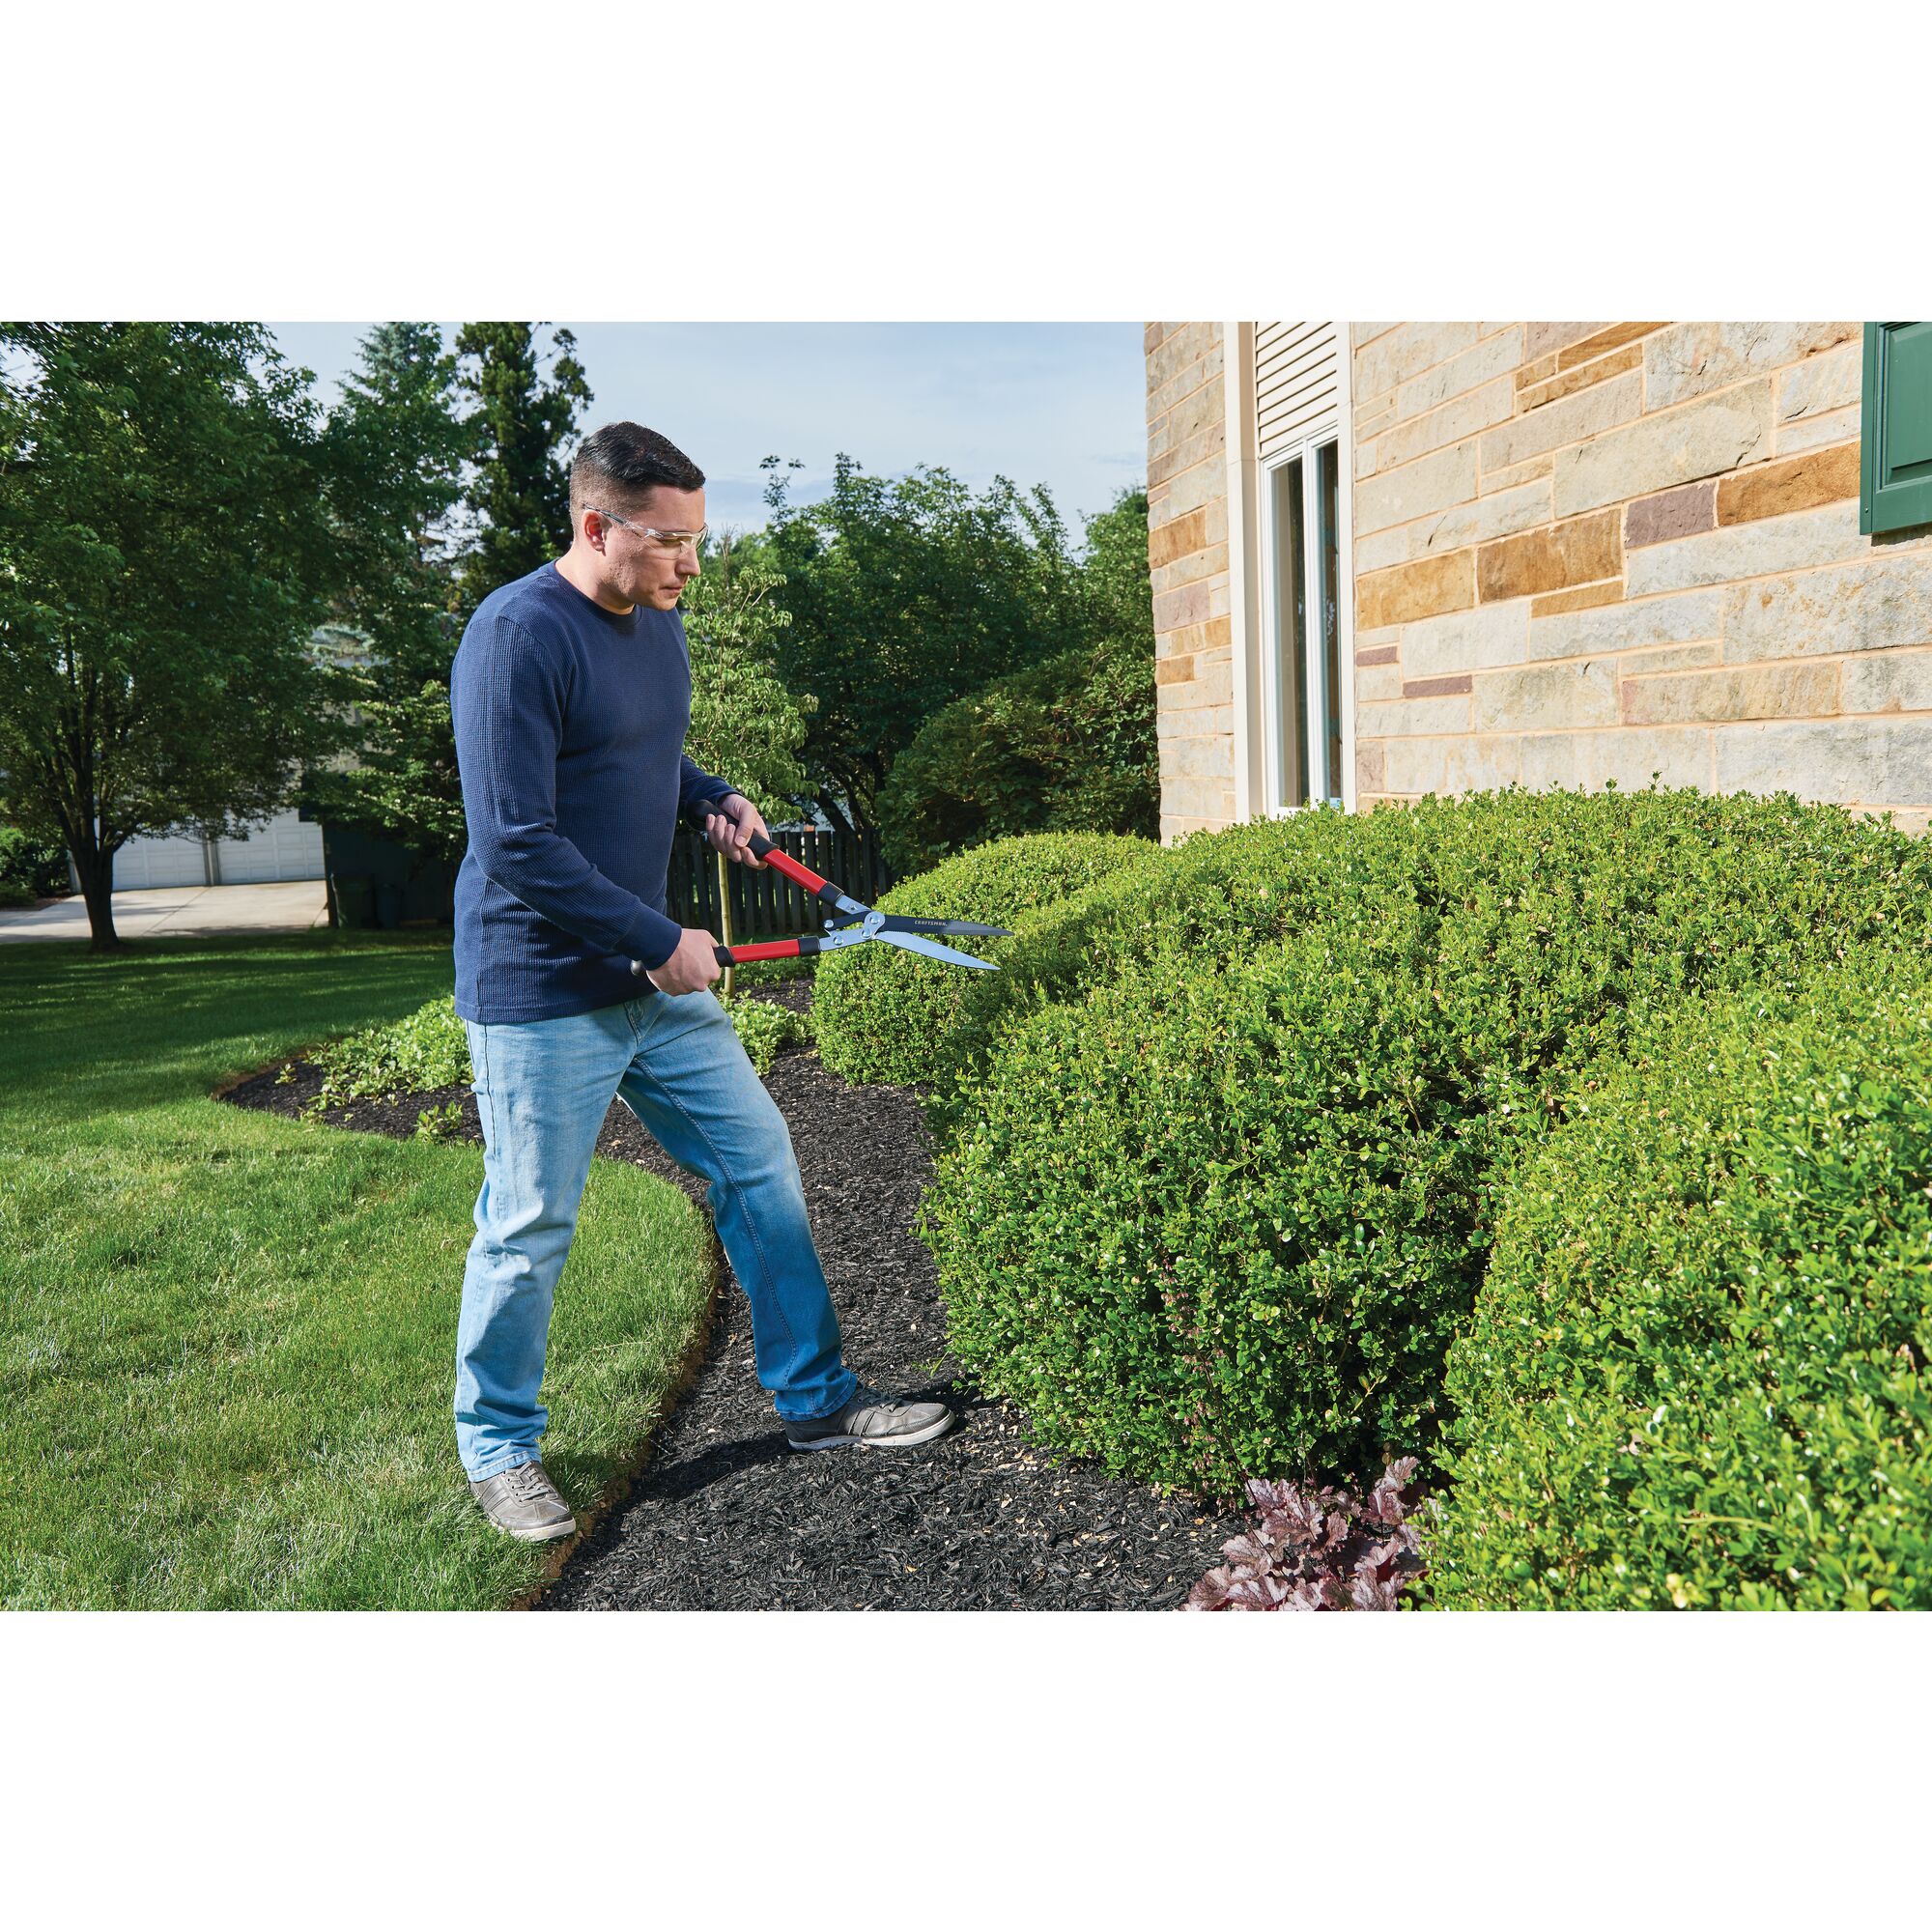 Hedge shears with compound action blade being used by a person to trim a hedge outdoors.